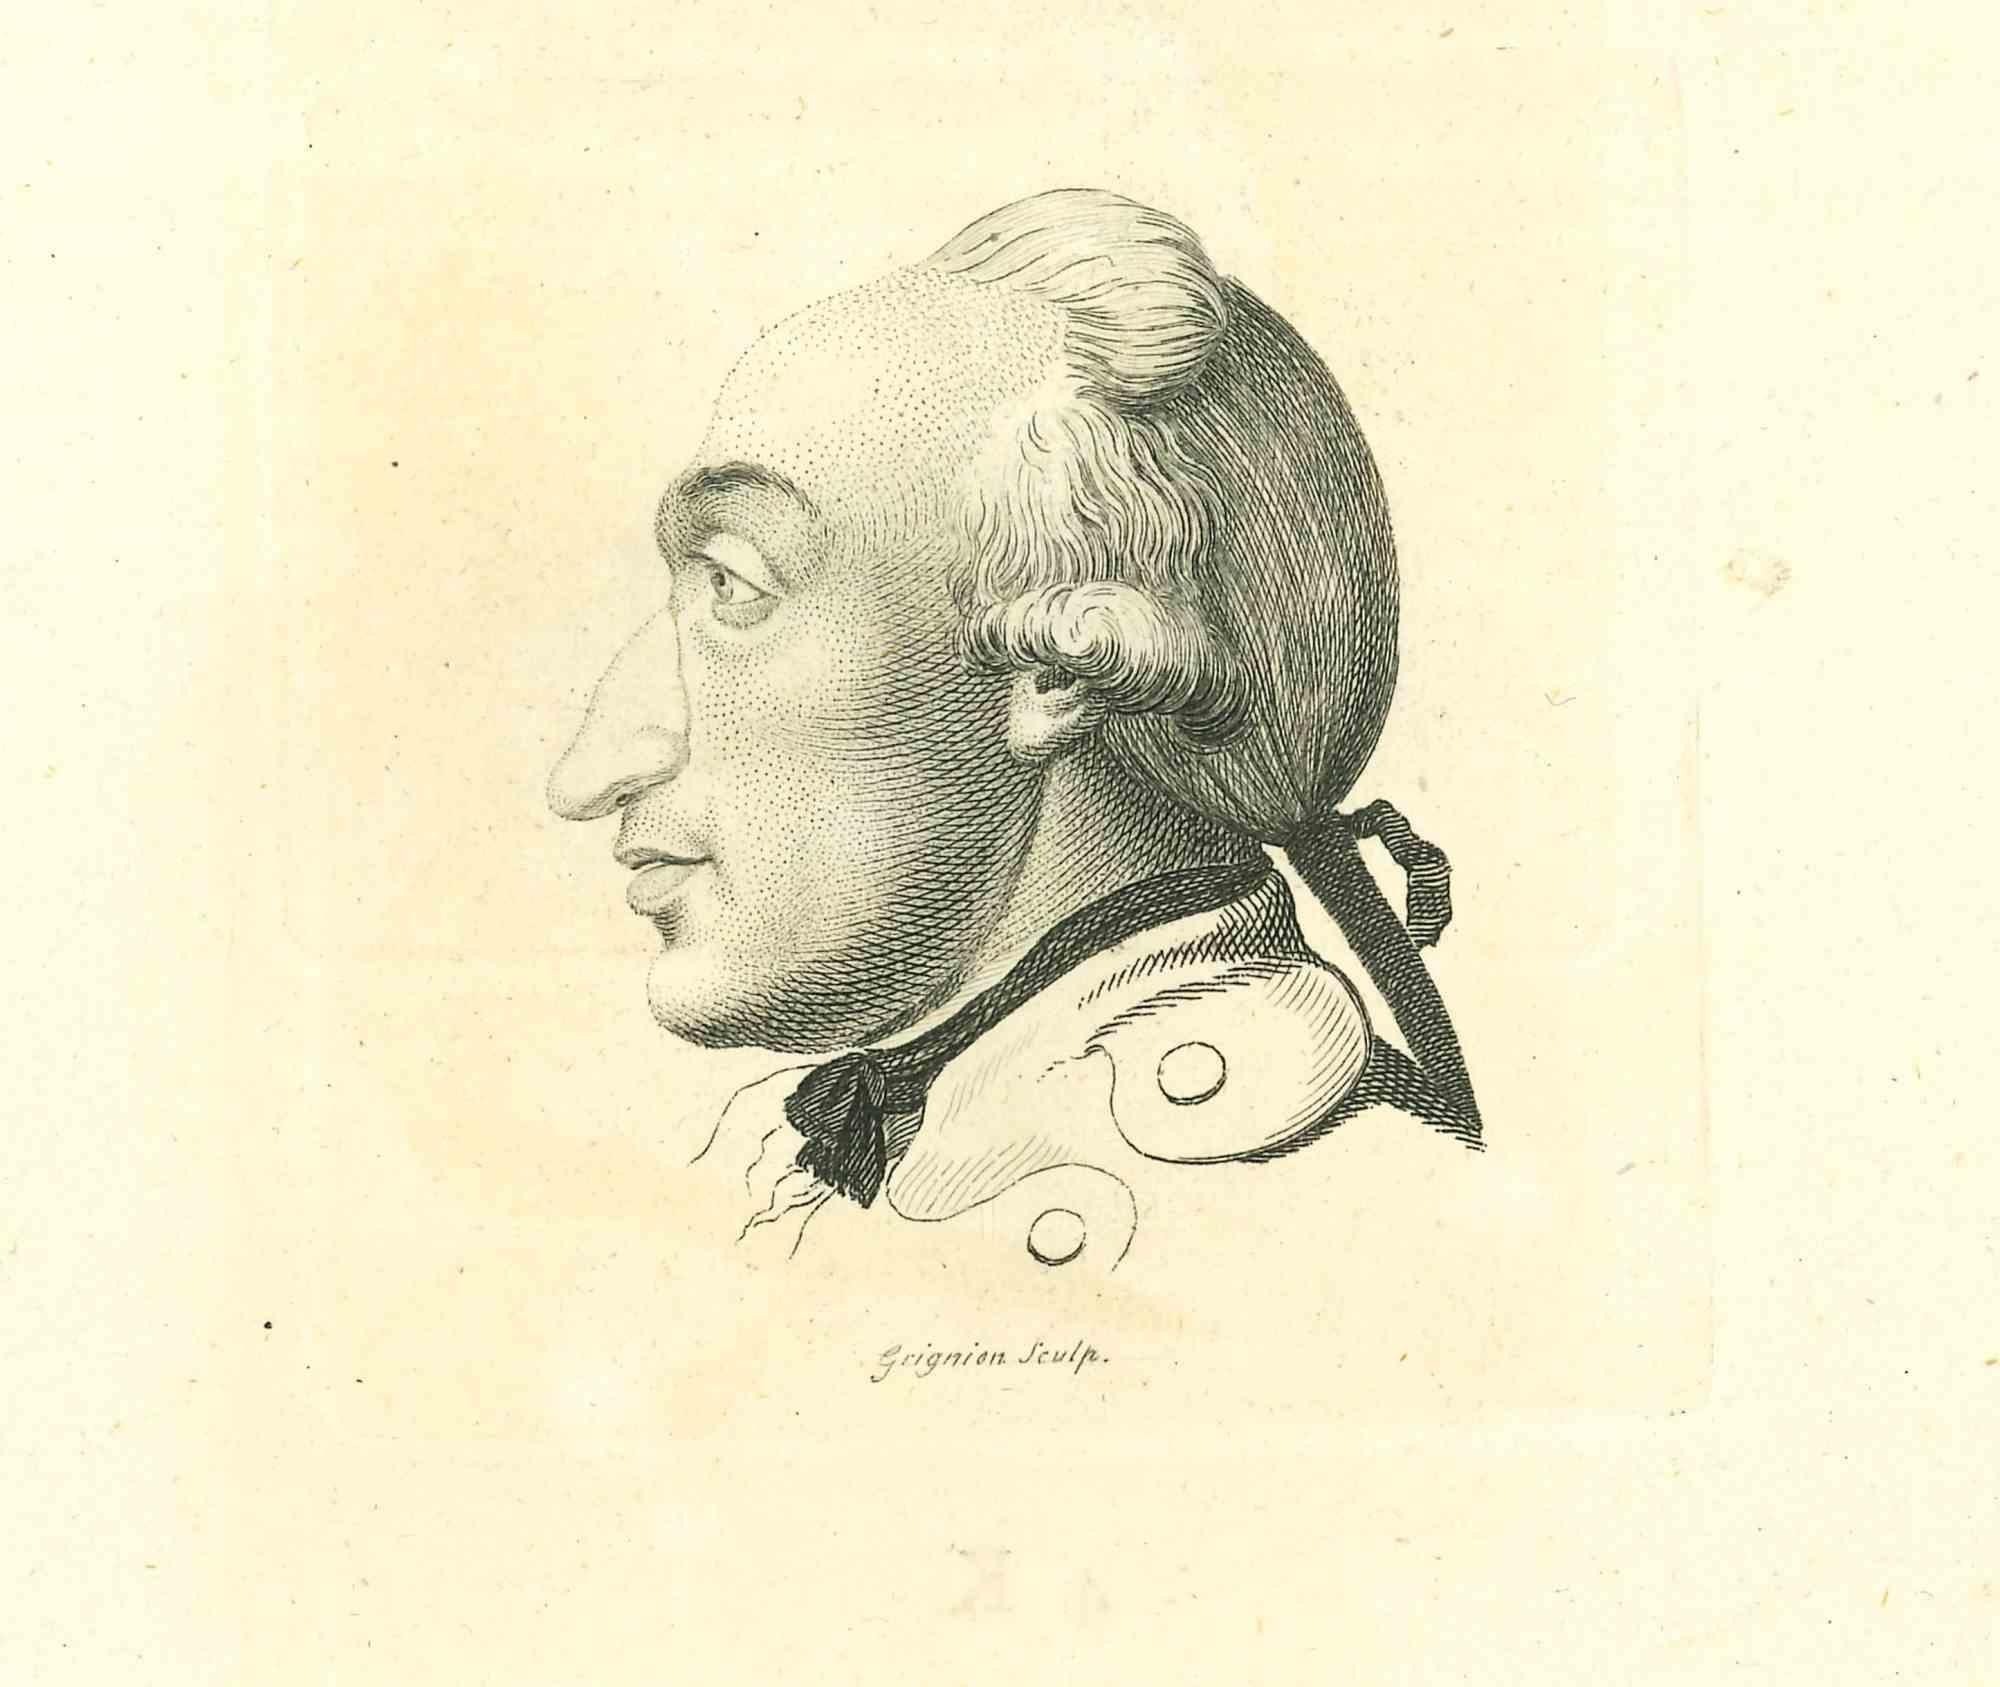 The Profile After Grignion is an original etching artwork realized by Thomas Holloway for Johann Caspar Lavater's "Essays on Physiognomy, Designed to Promote the Knowledge and the Love of Mankind", London, Bensley, 1810. 

Engraved "Grignion" on the